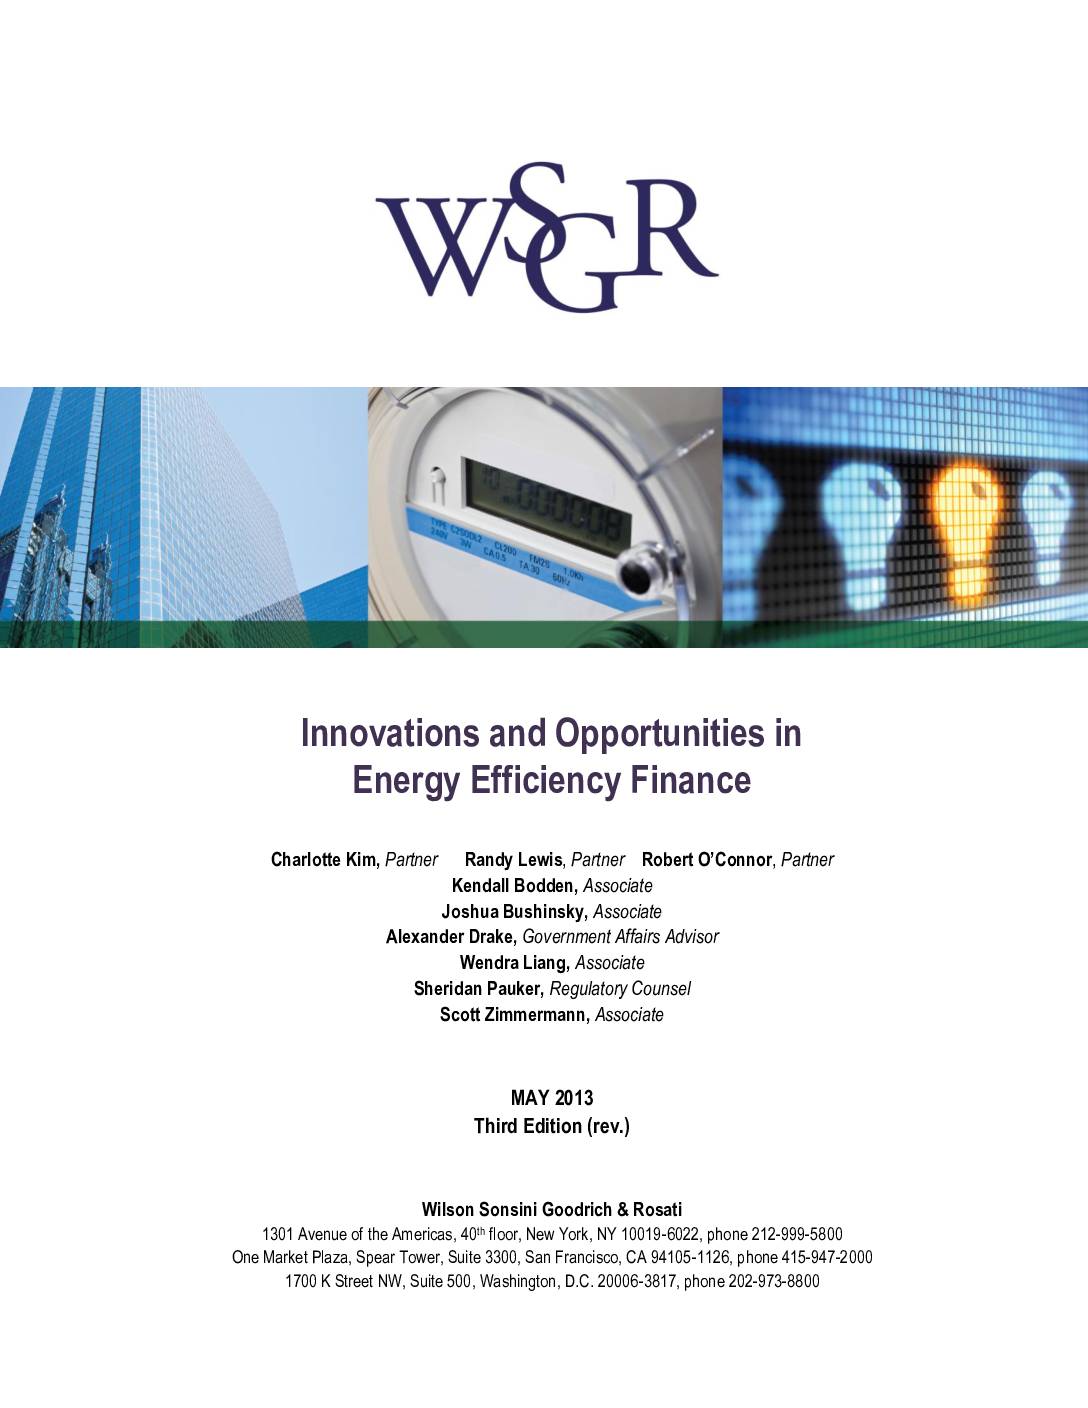 Innovations and Opportunities in Energy Efficiency Finance